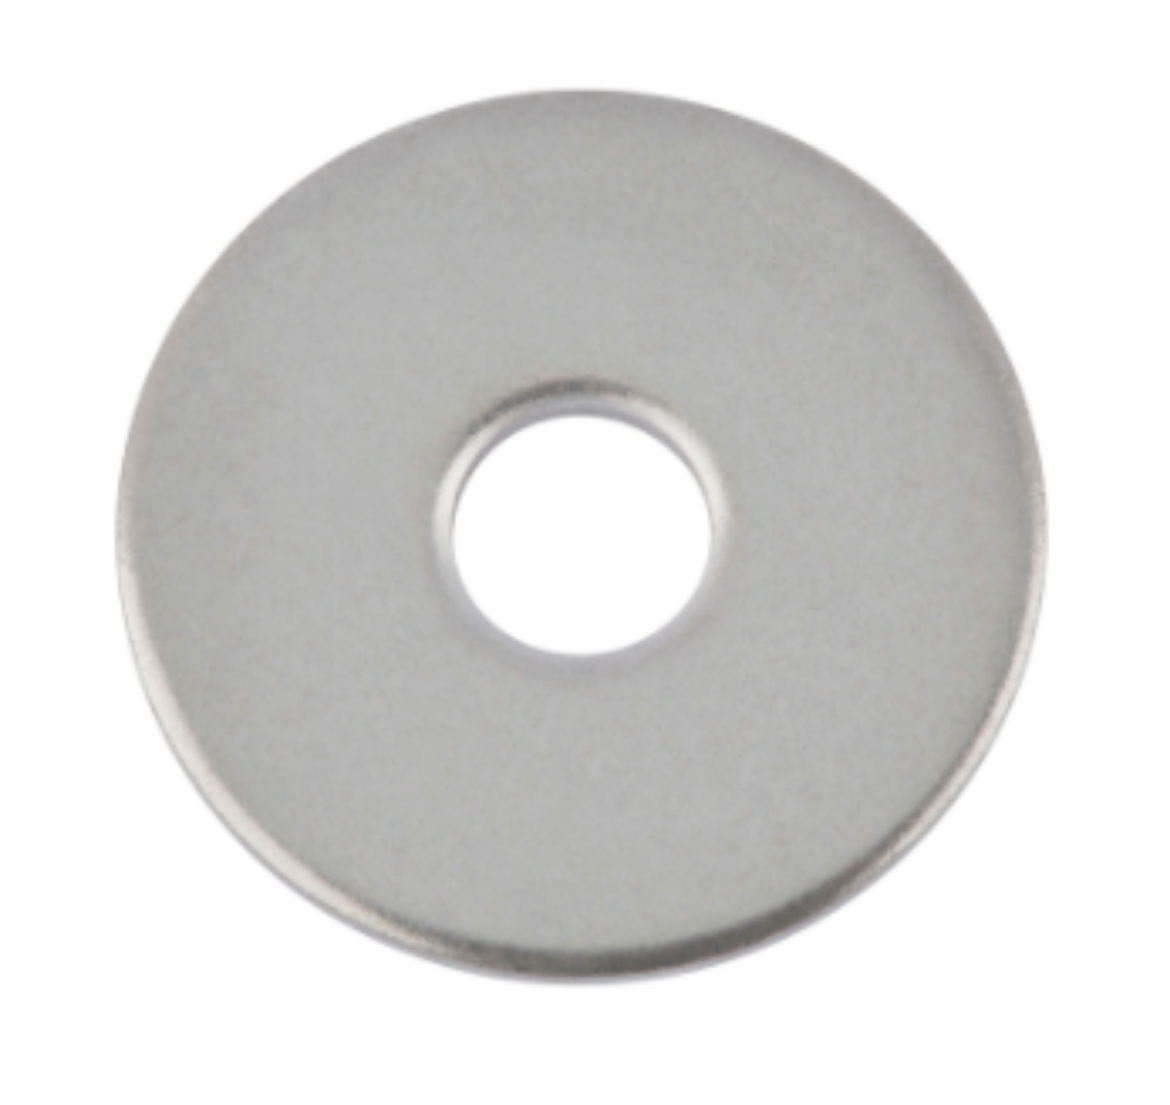 Picture of FENDER WASHER 1/2 x 2 x 12G ZINC